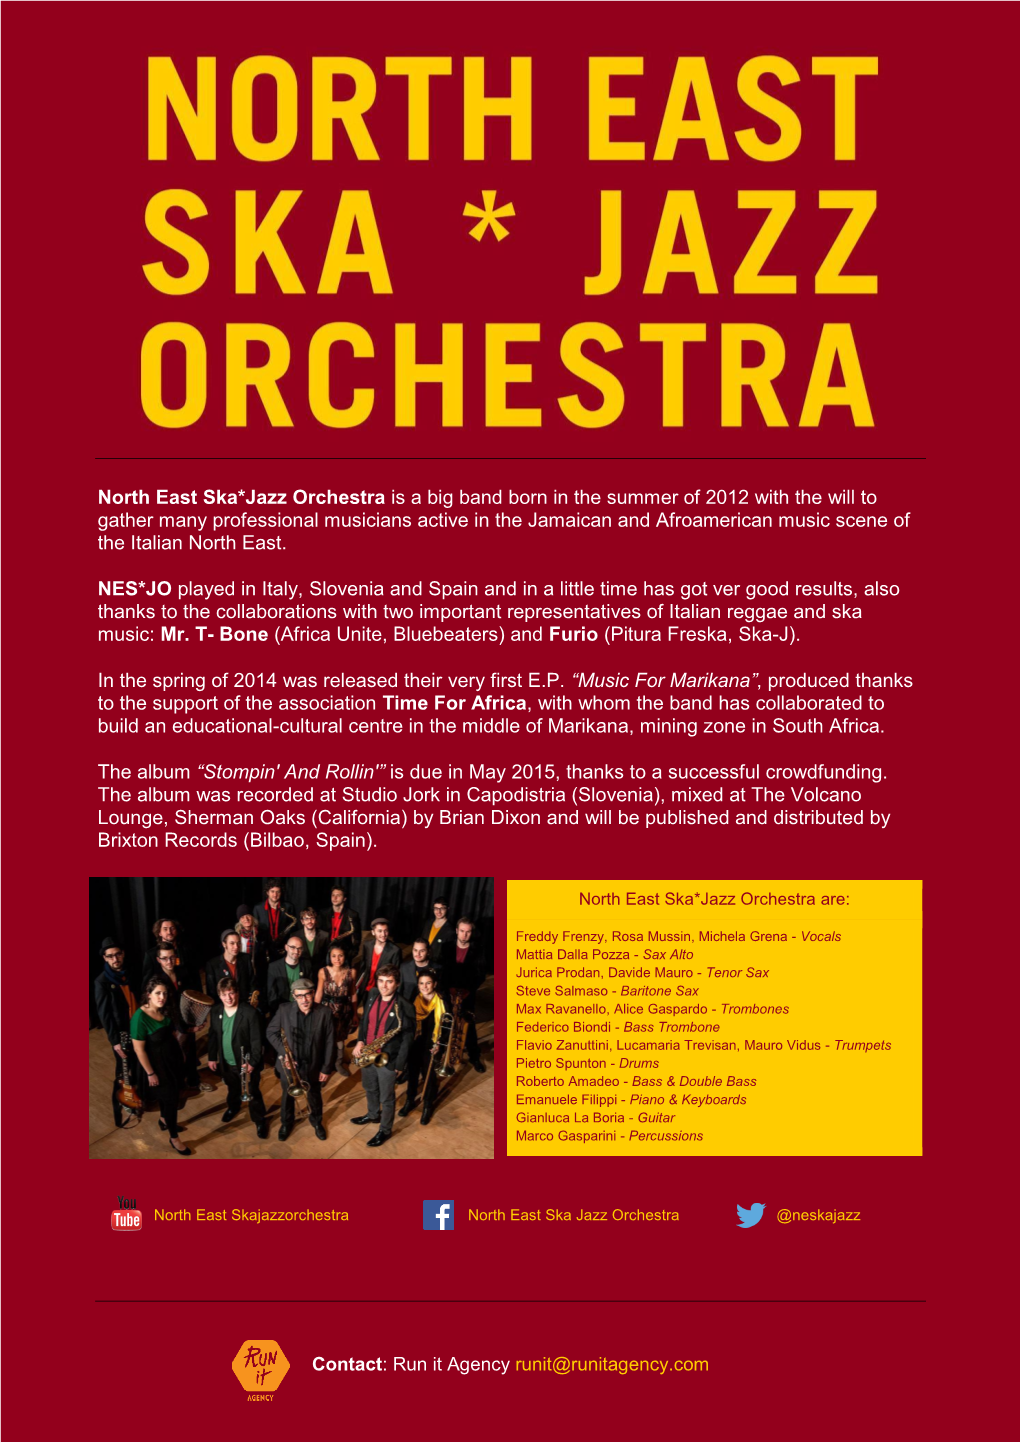 North East Ska*Jazz Orchestra Is a Big Band Born in the Summer of 2012